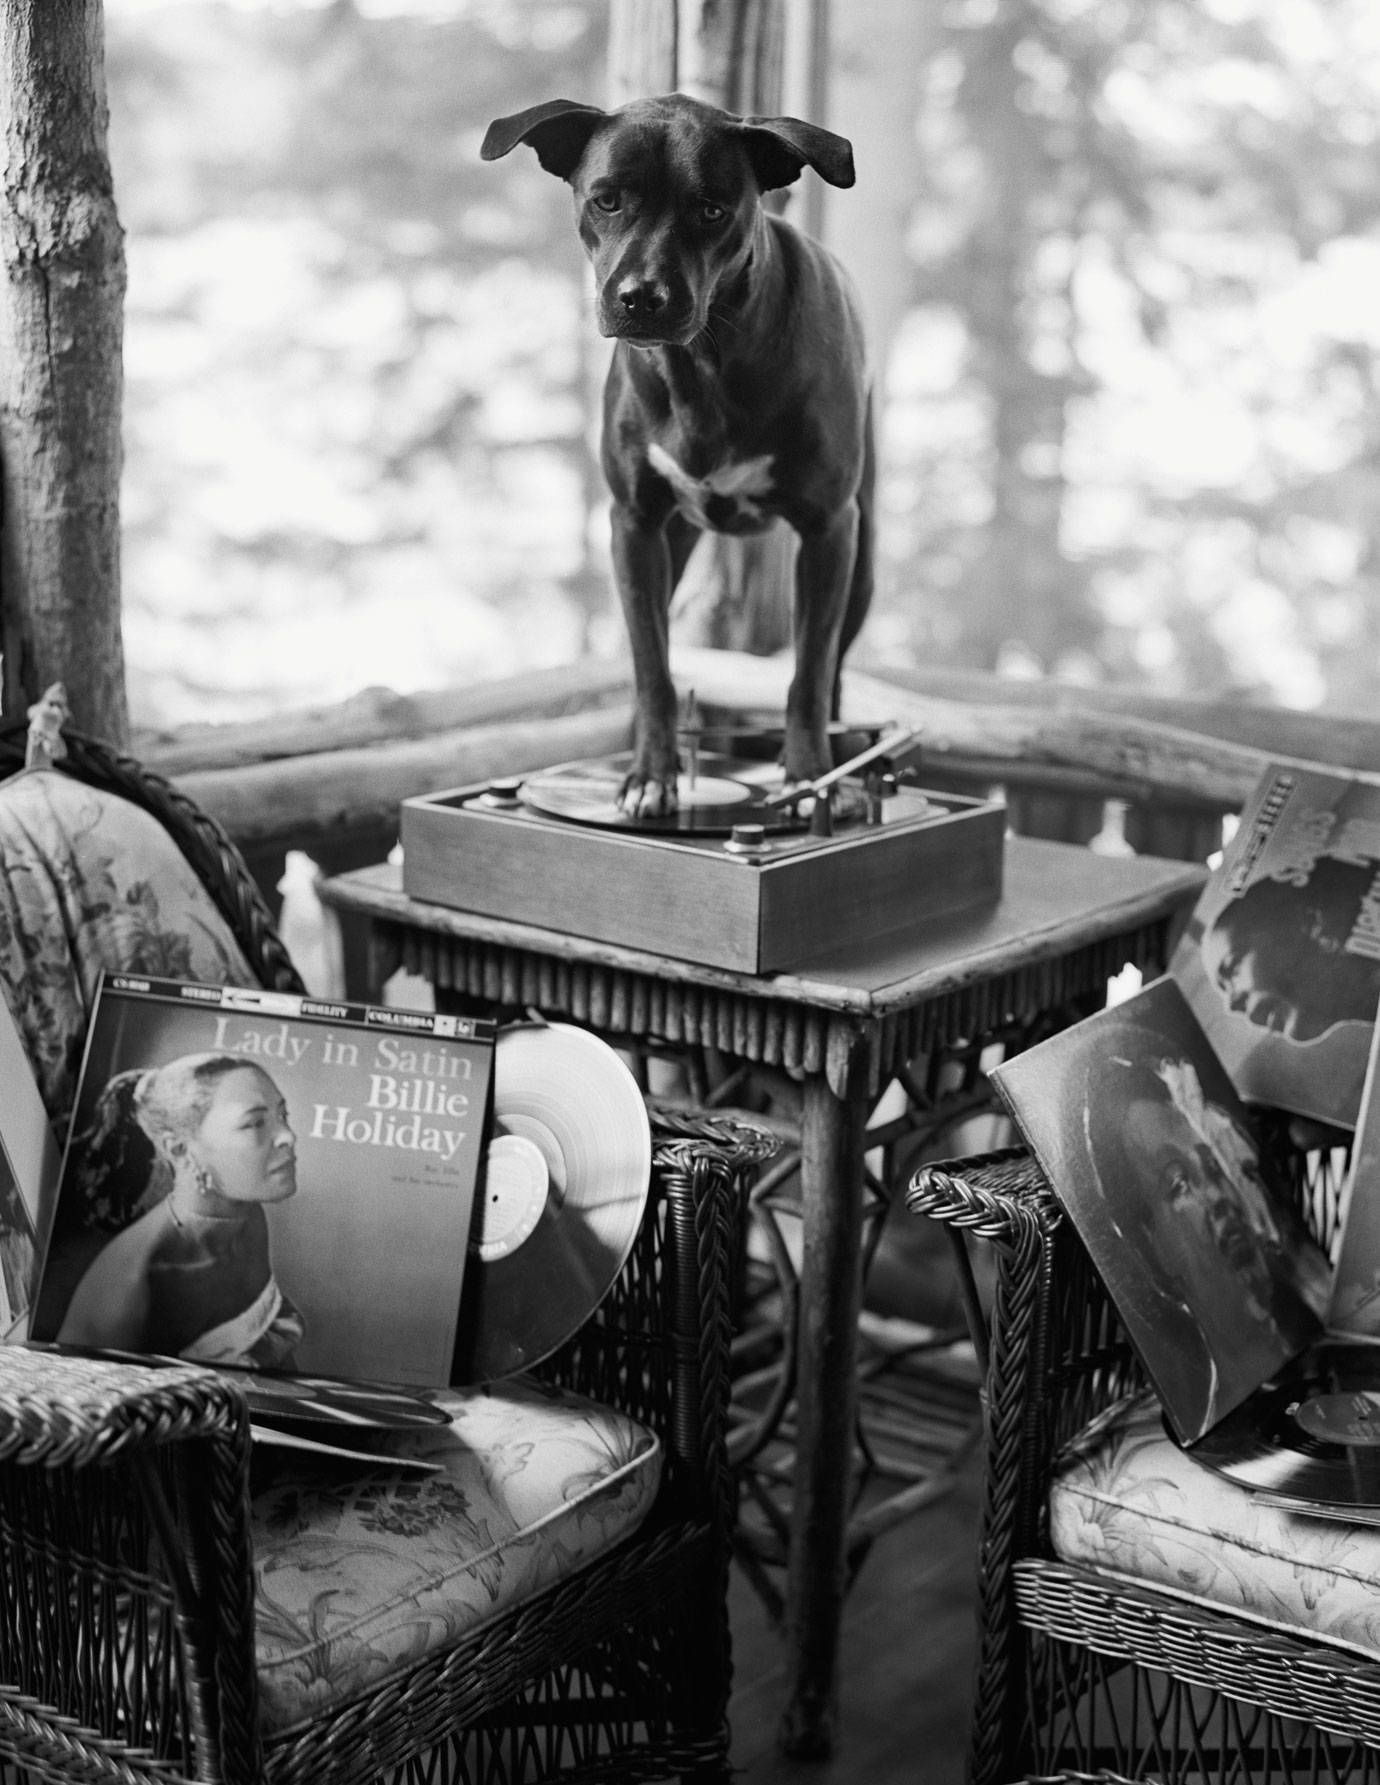 Photo of black dog standing on record player with Billie Holiday records scattered around